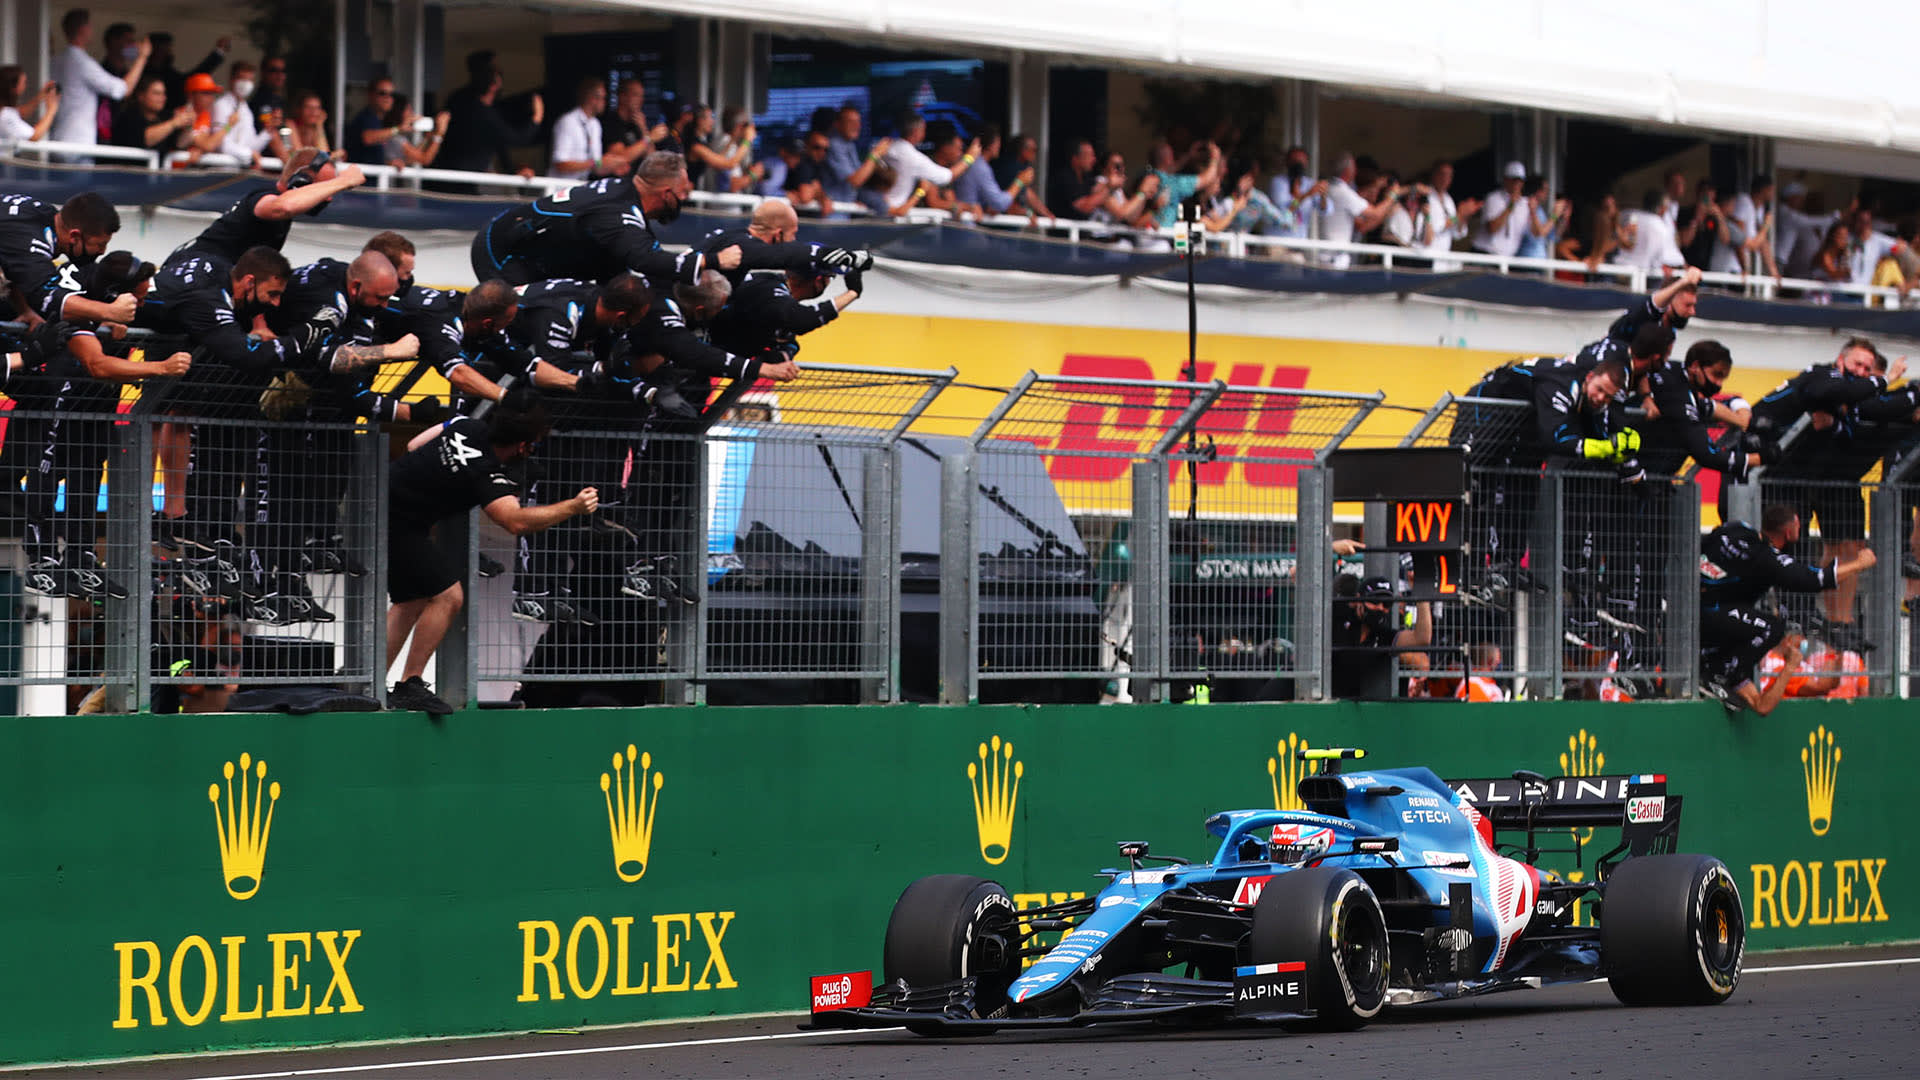 2021 Hungarian Grand Prix race report and highlights Ocon claims shock maiden victory in action-packed Hungarian Grand Prix as Vettel disqualified from P2 Formula 1®